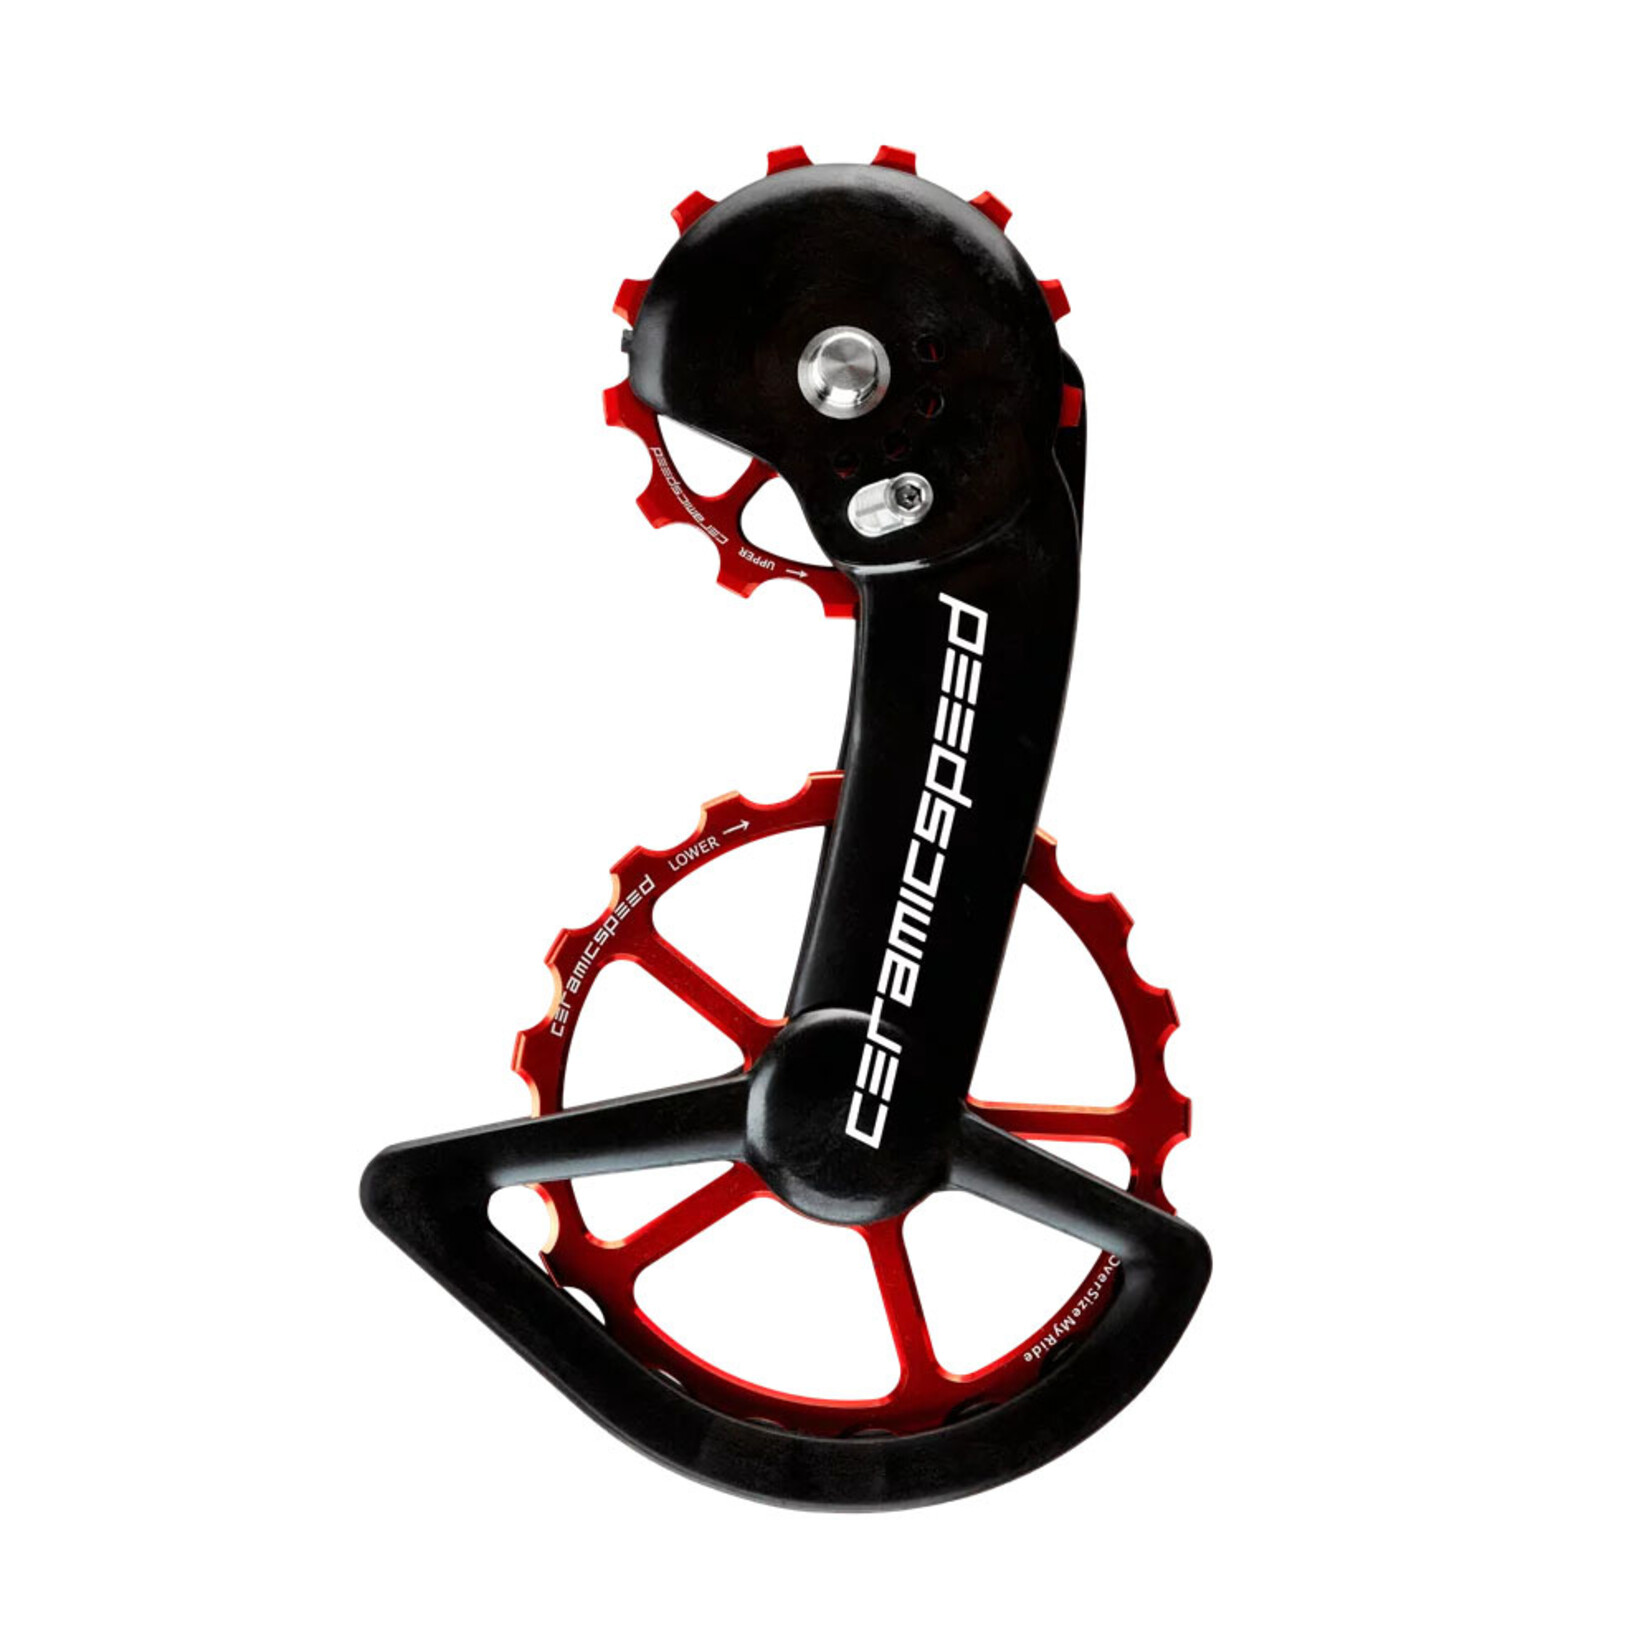 CERAMICSPEED OSPW  X System for Shimano GRX 815 Di2 Gravel Coated